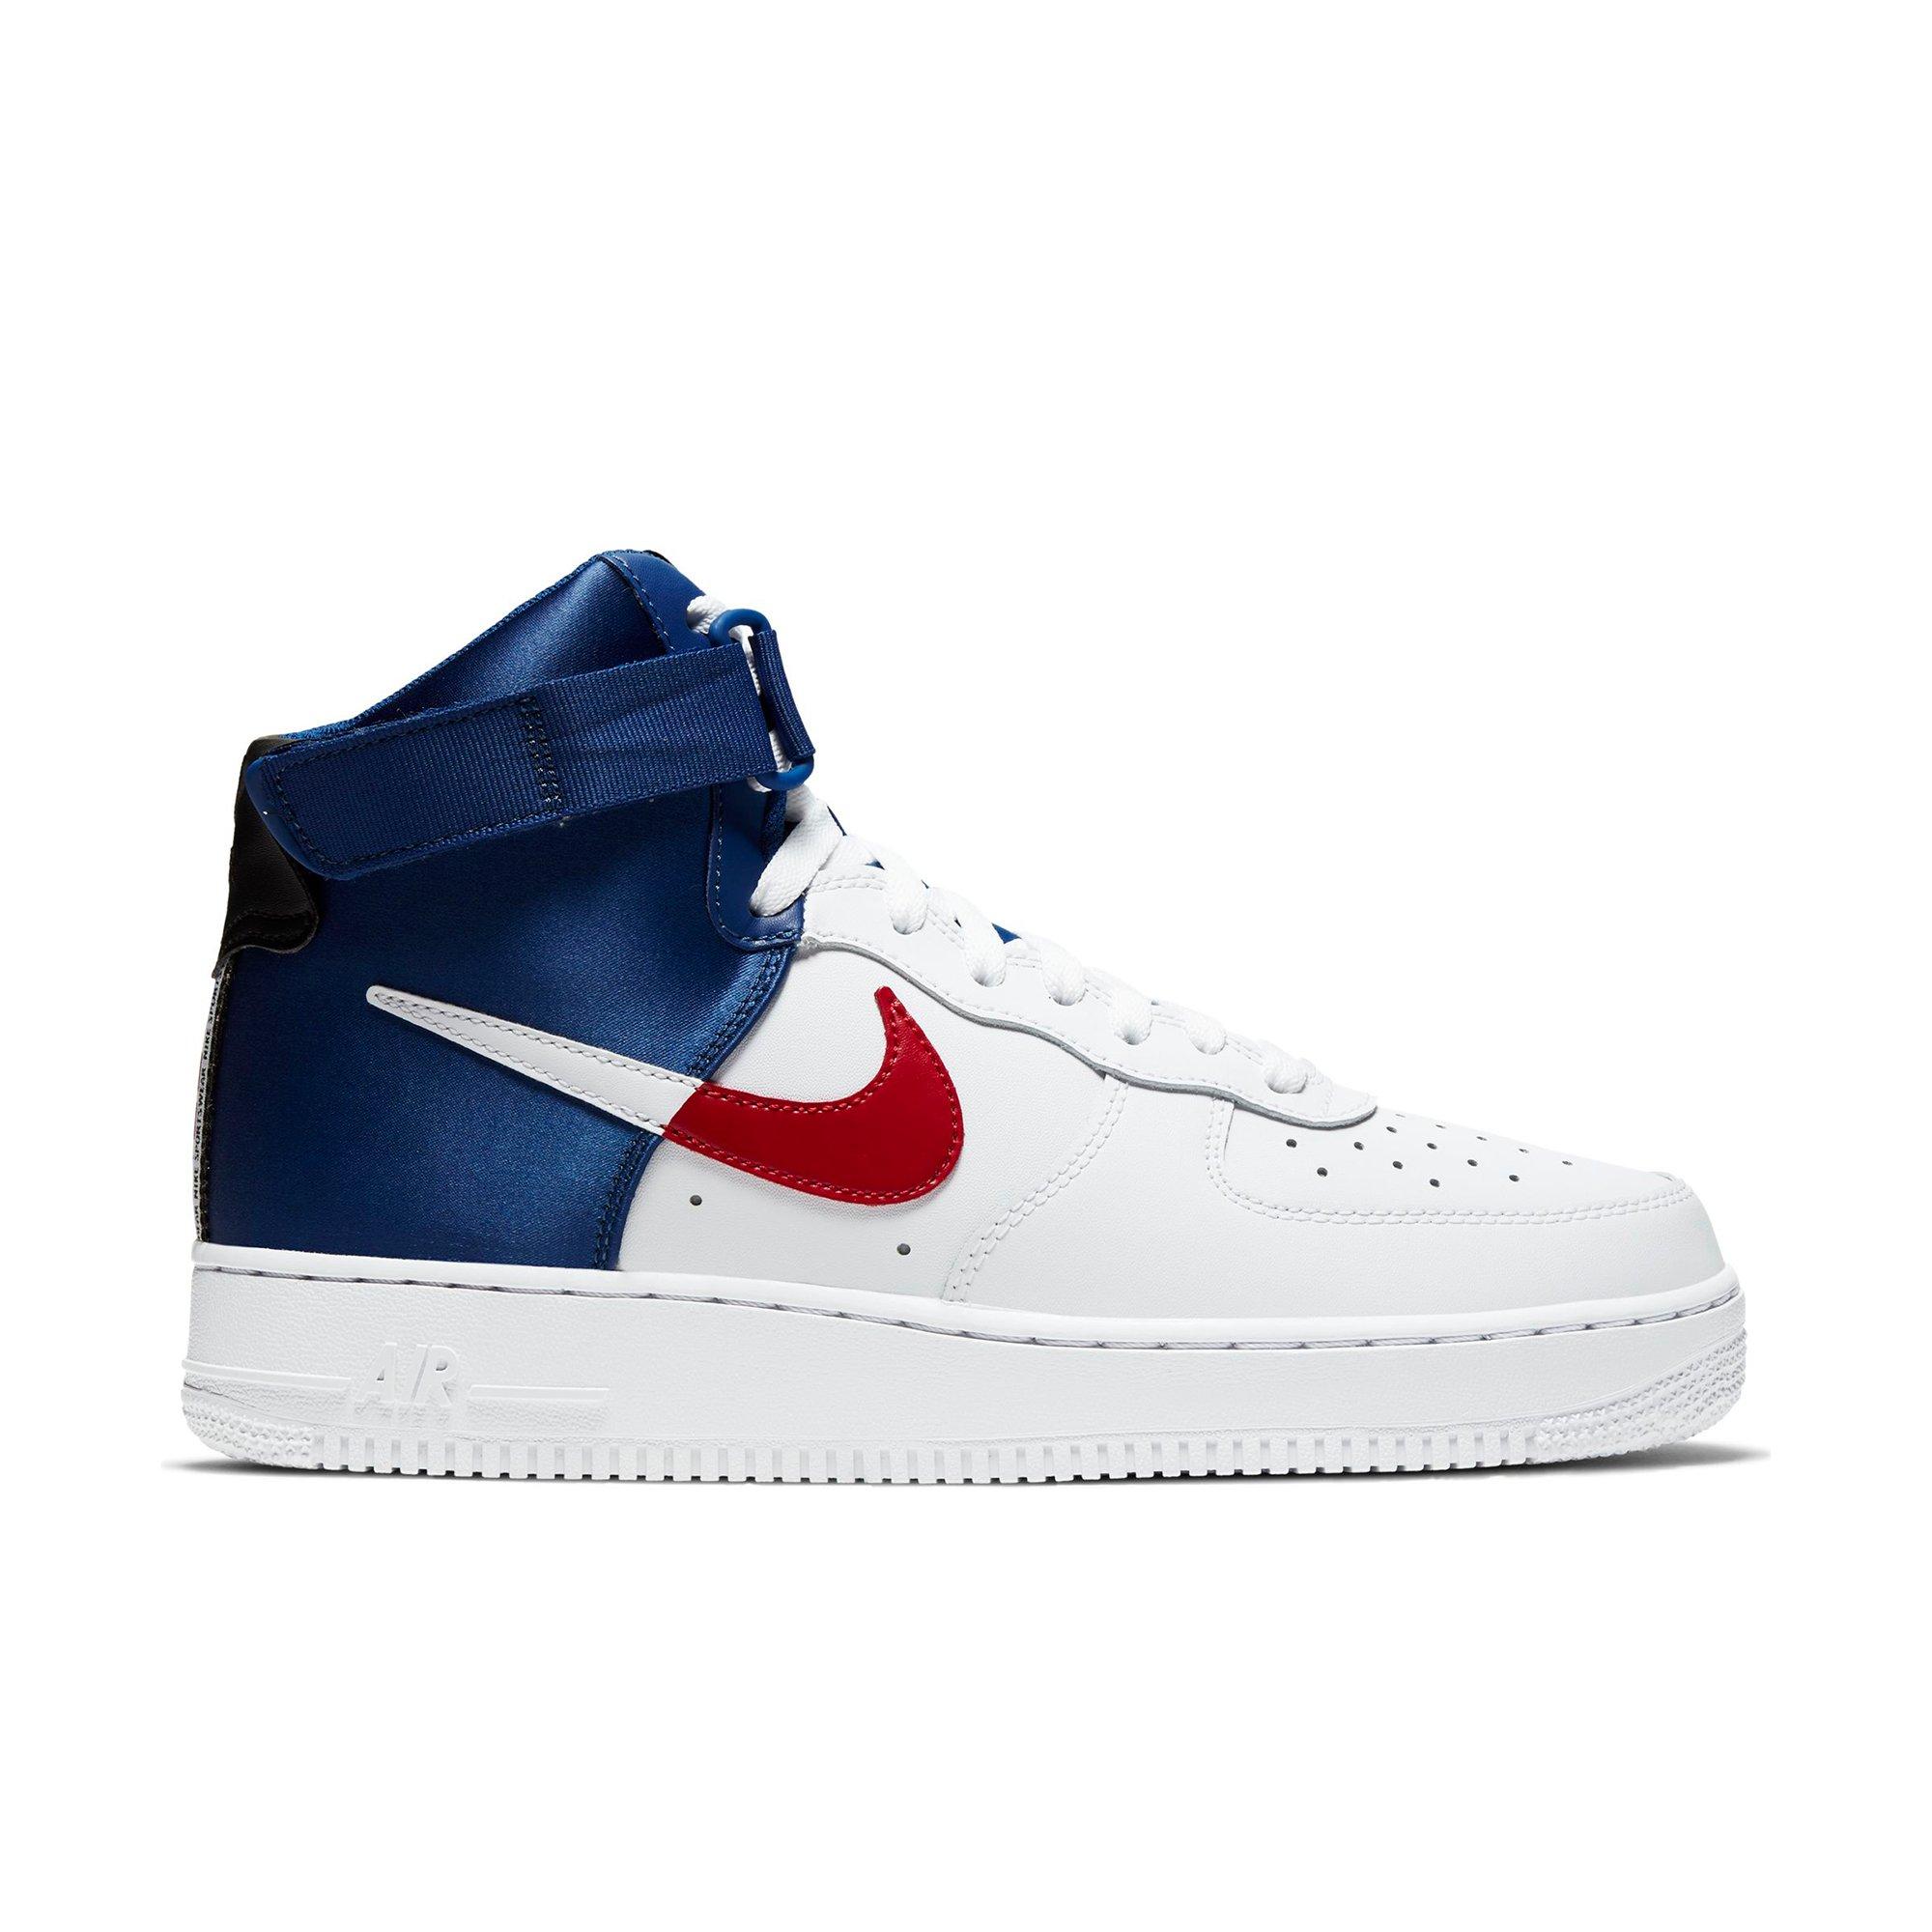 red white and blue air forces high top